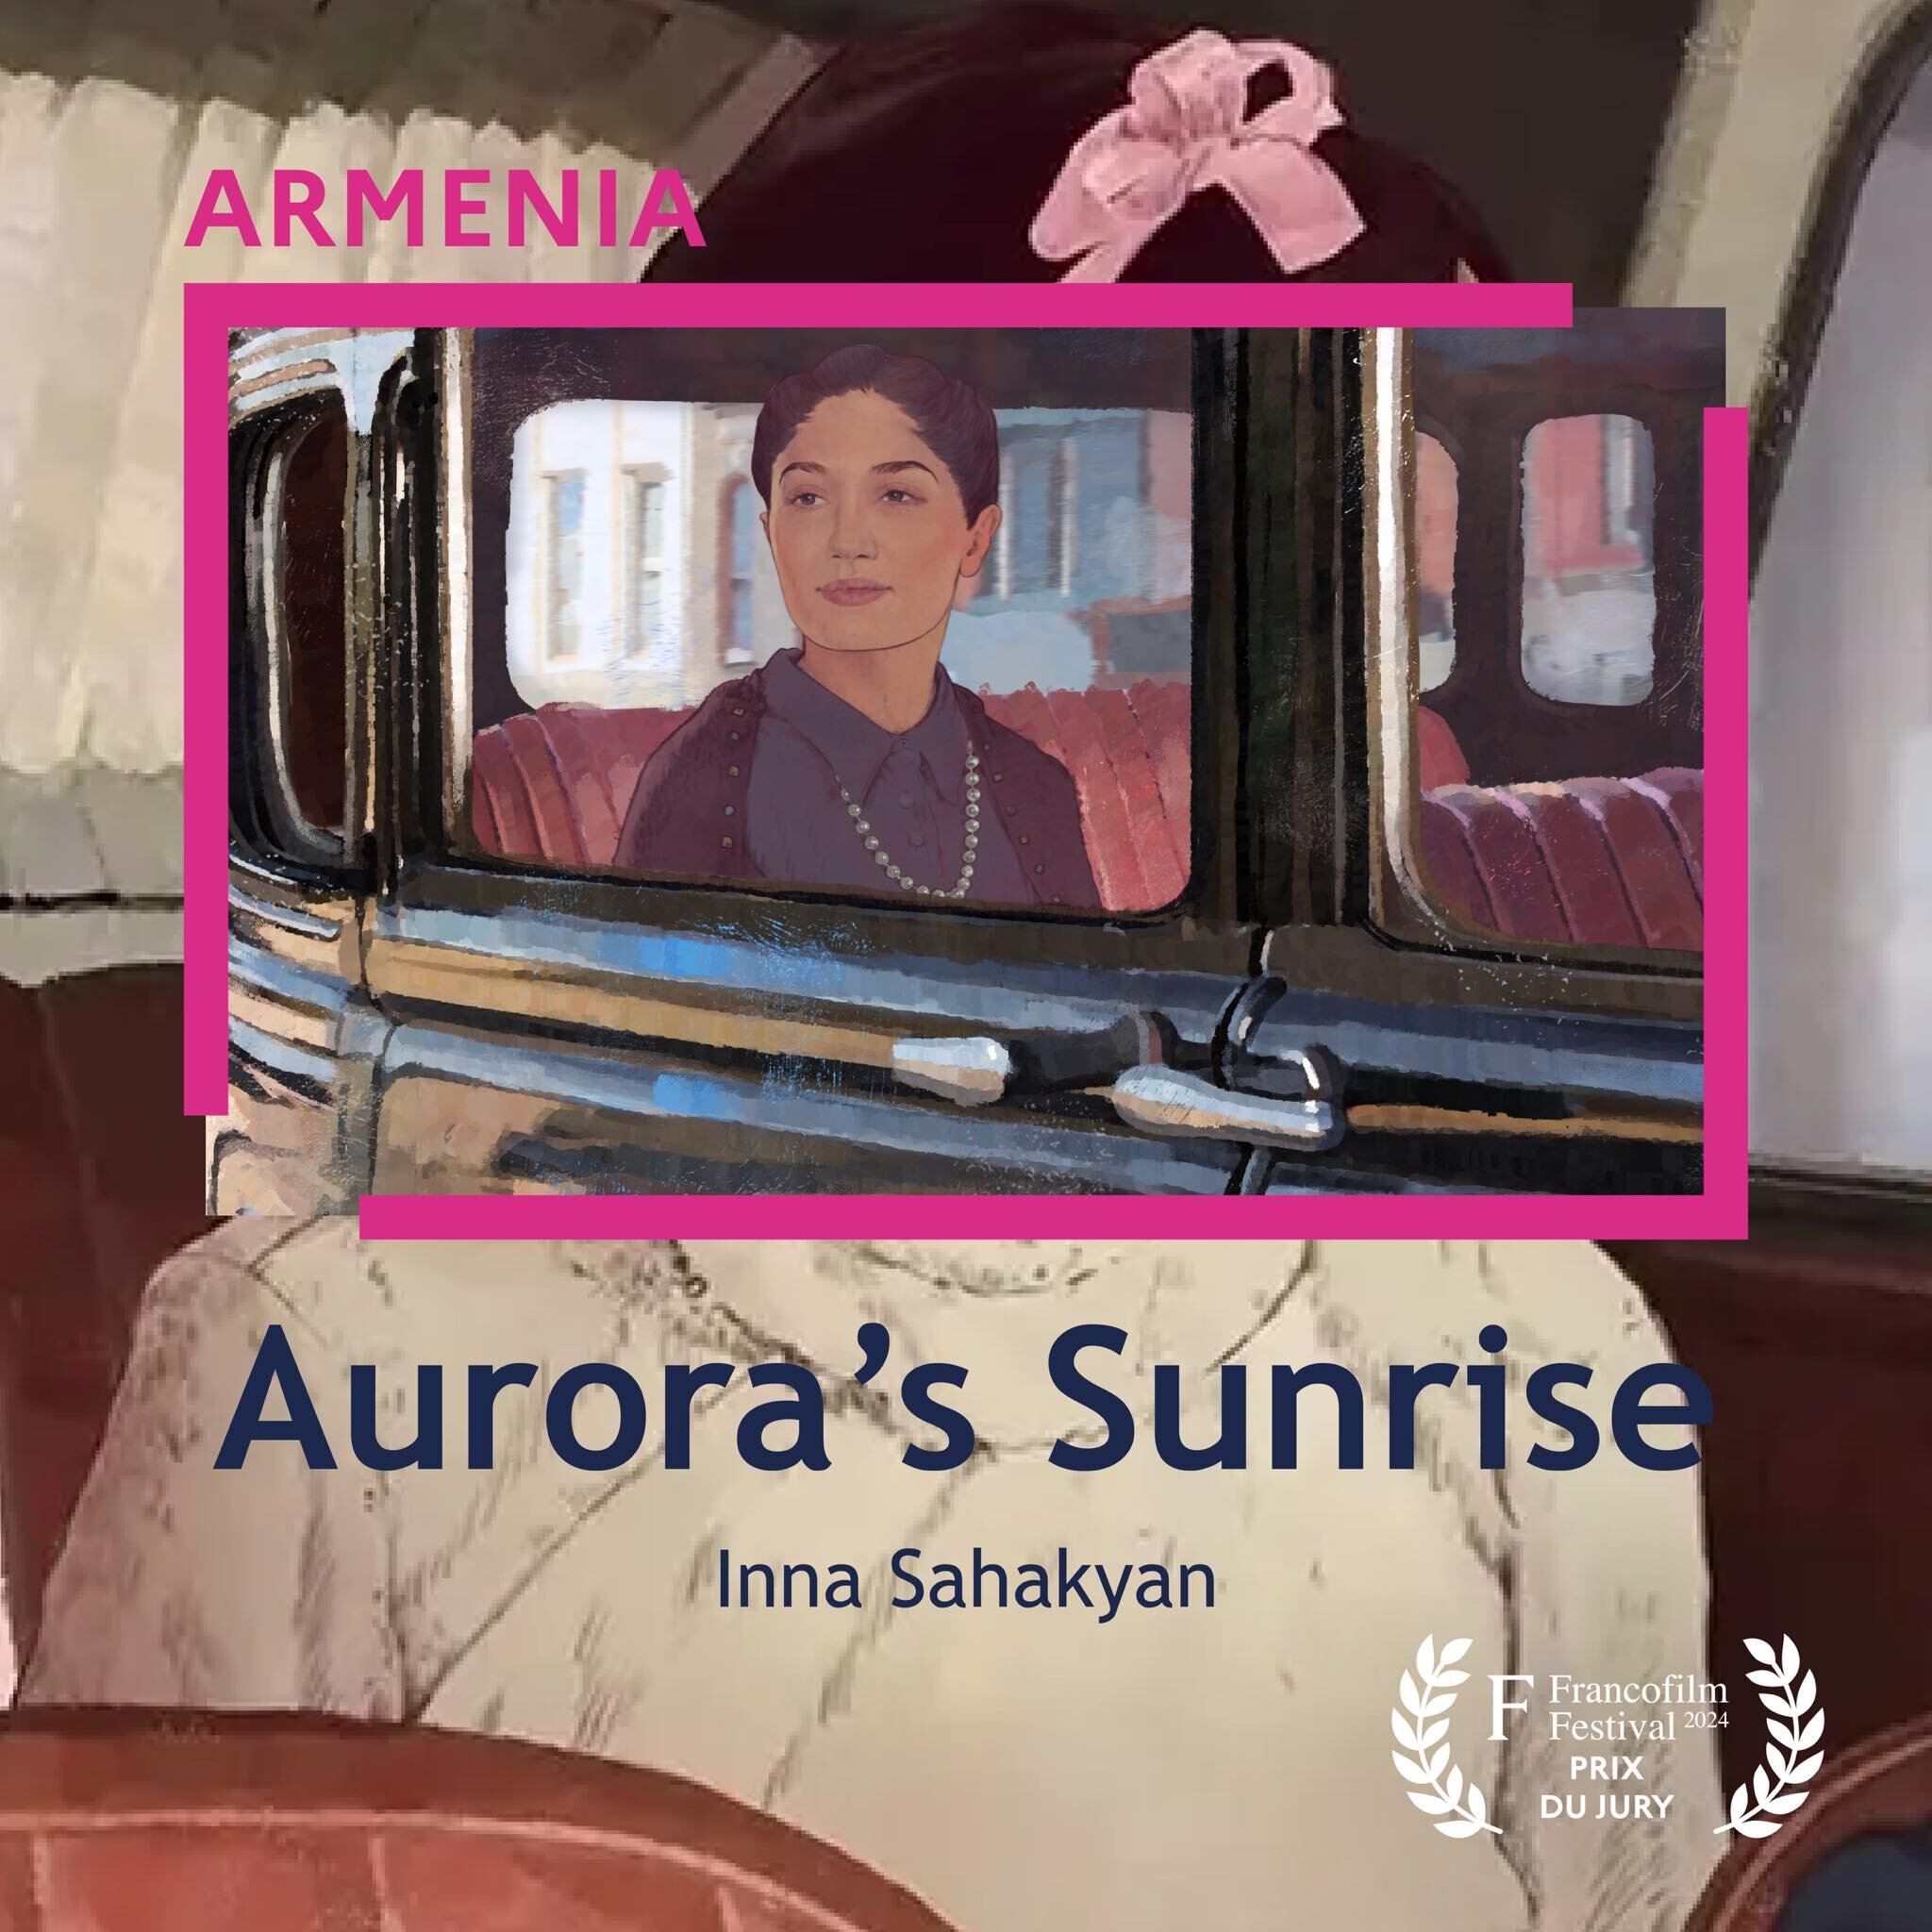 ❗NEW AWARD❗

'Aurora's Sunrise' has won the Jury Grand Prize at the XIV edition of the #Francofilmfestival, organized by the @if_centresaintlouis  with the support of the Francophone Embassies in Italy!🎬

#aurorassunrise #film #barsmedia #cinema #ar